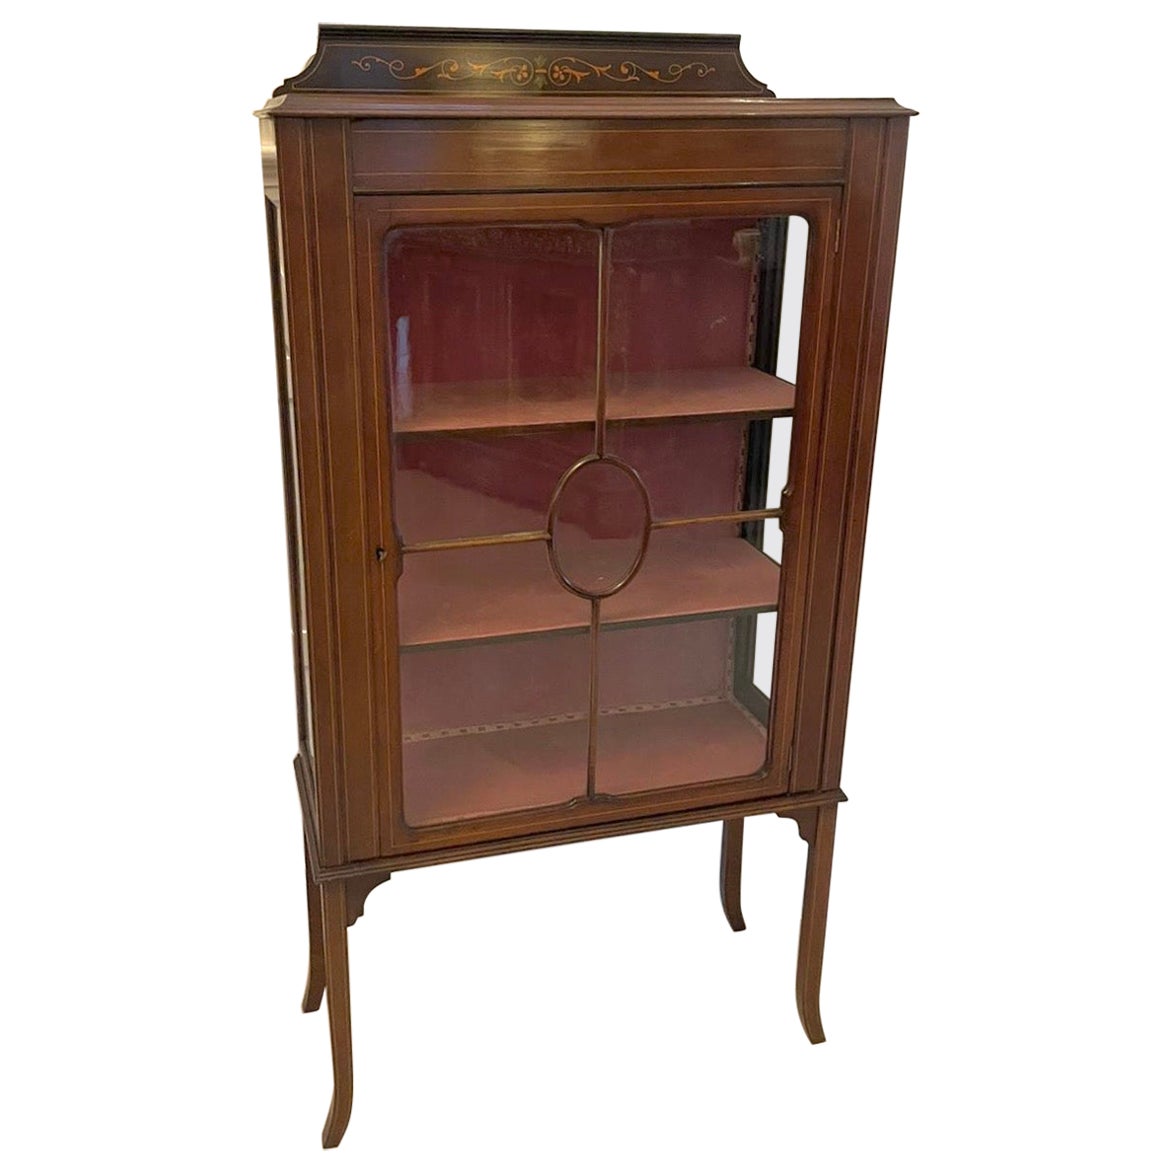  Antique Edwardian Quality Mahogany Inlaid Display Cabinet  For Sale